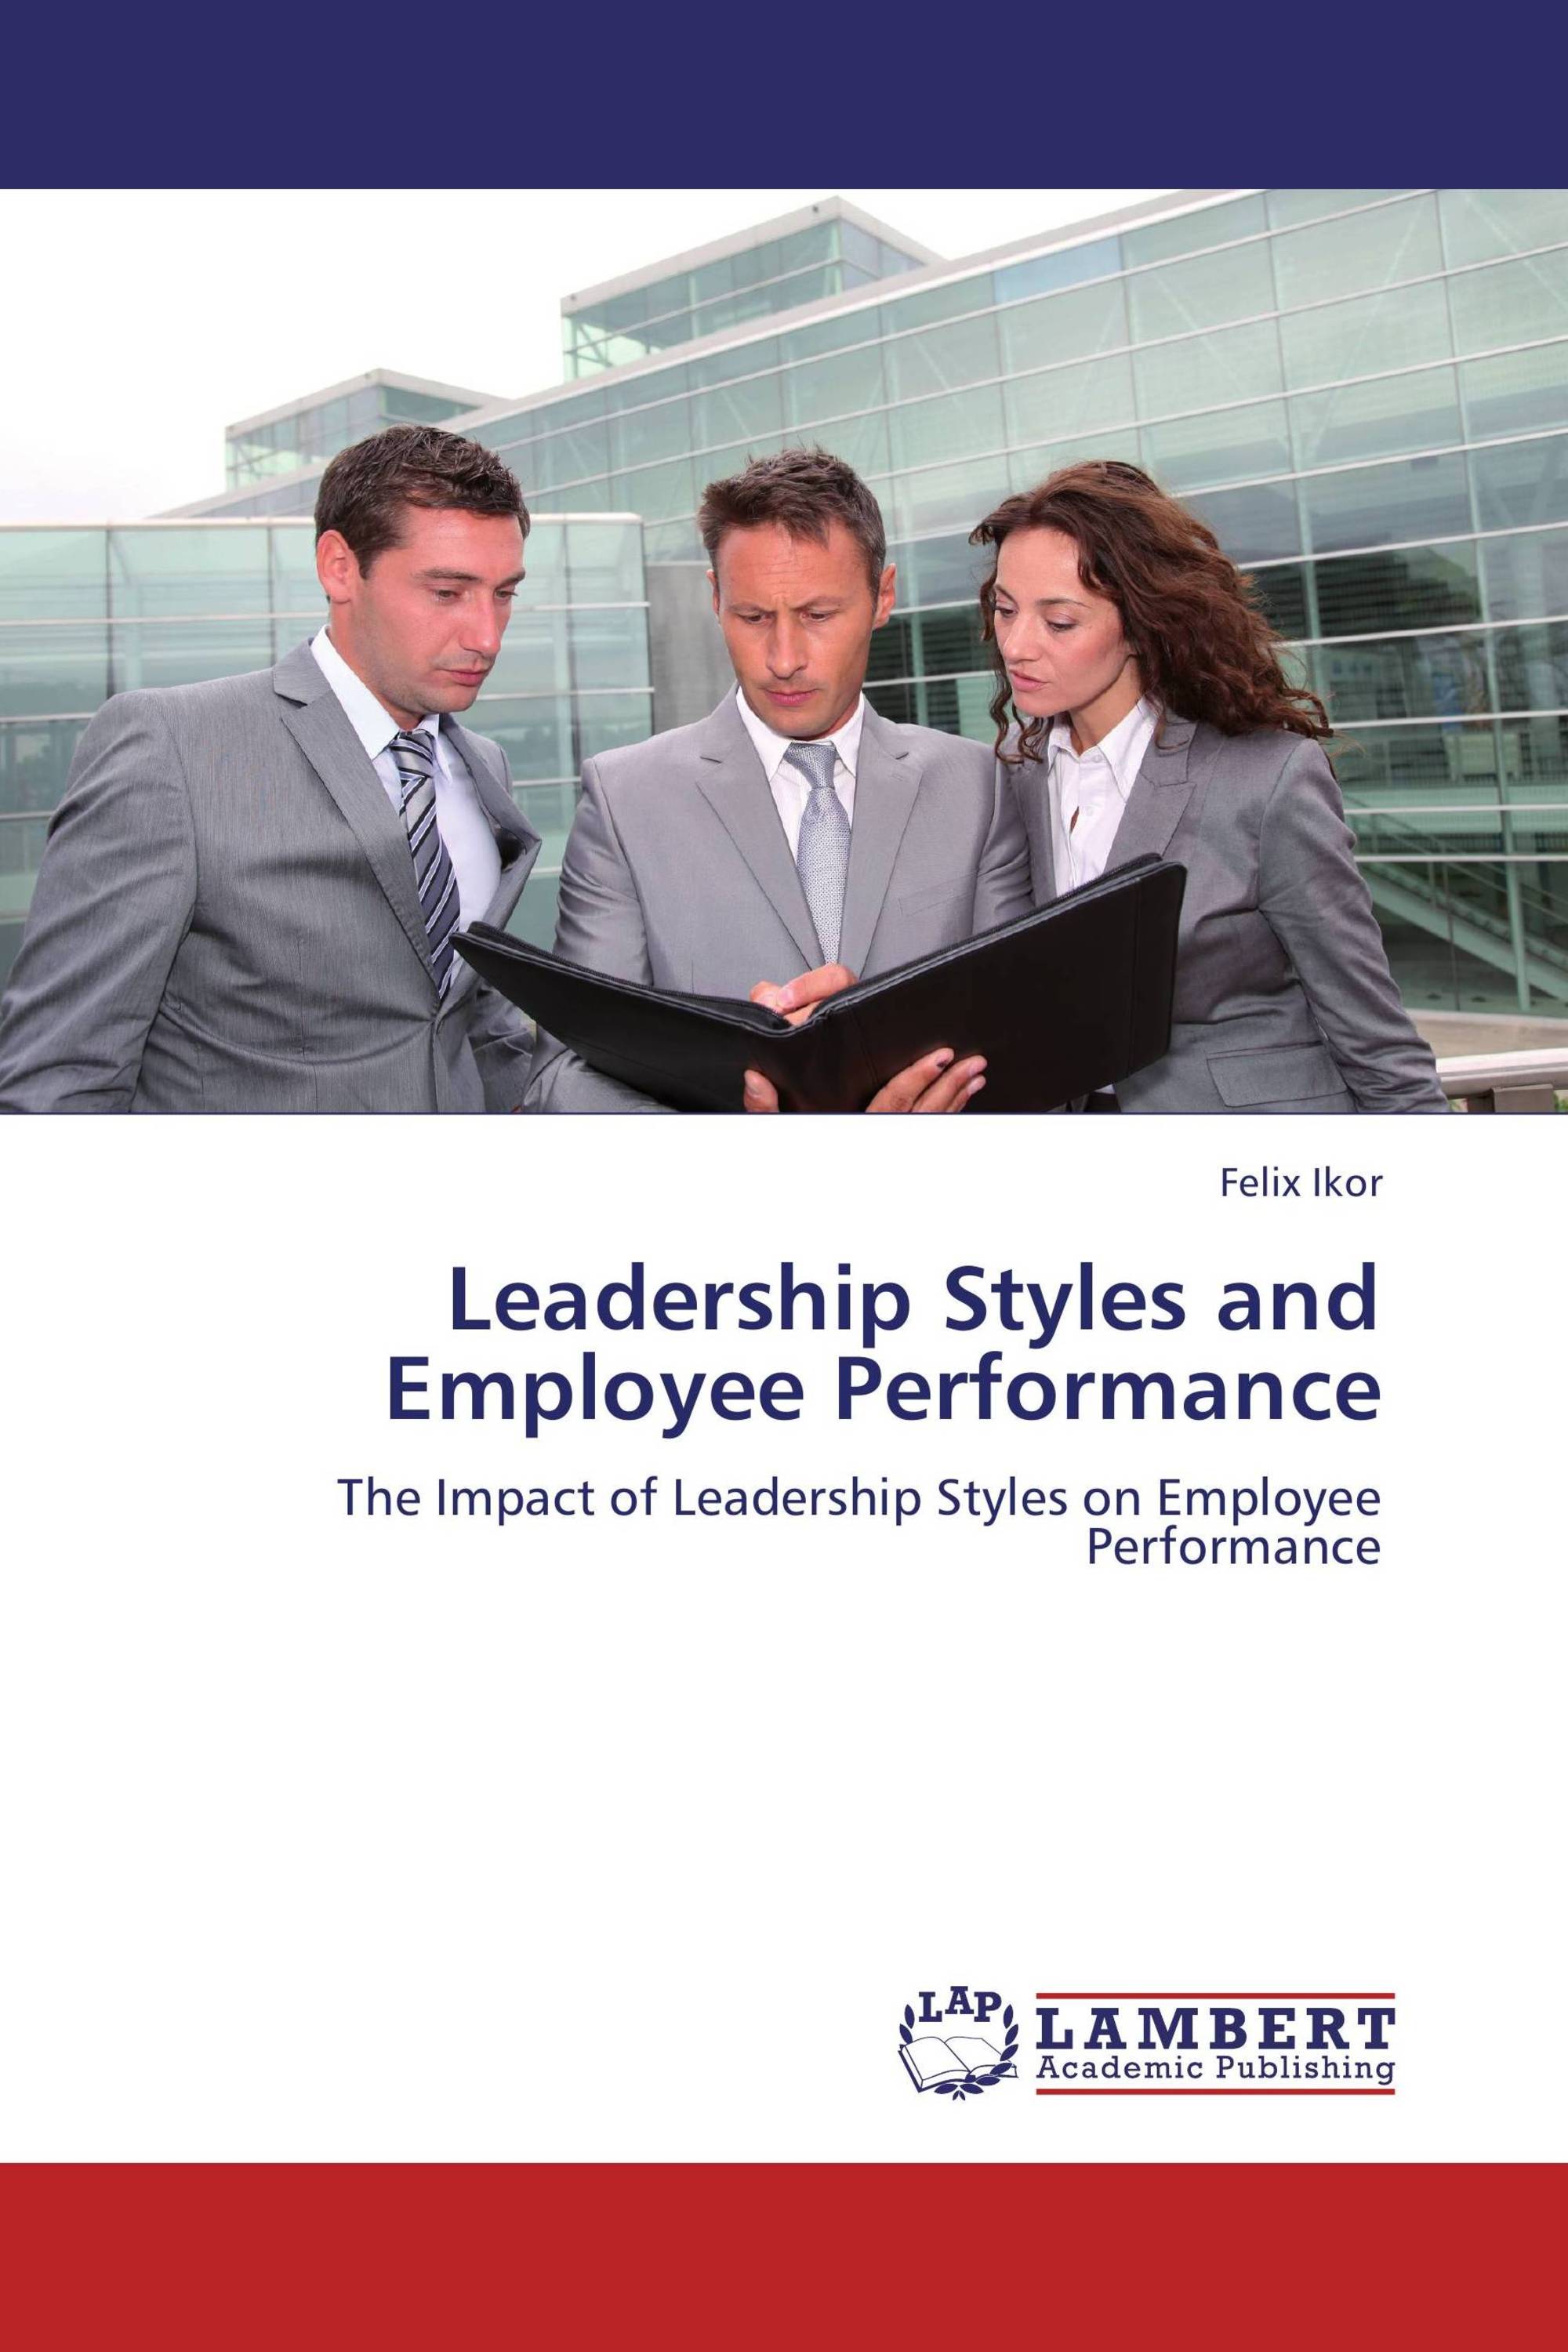 thesis on leadership styles and employee performance